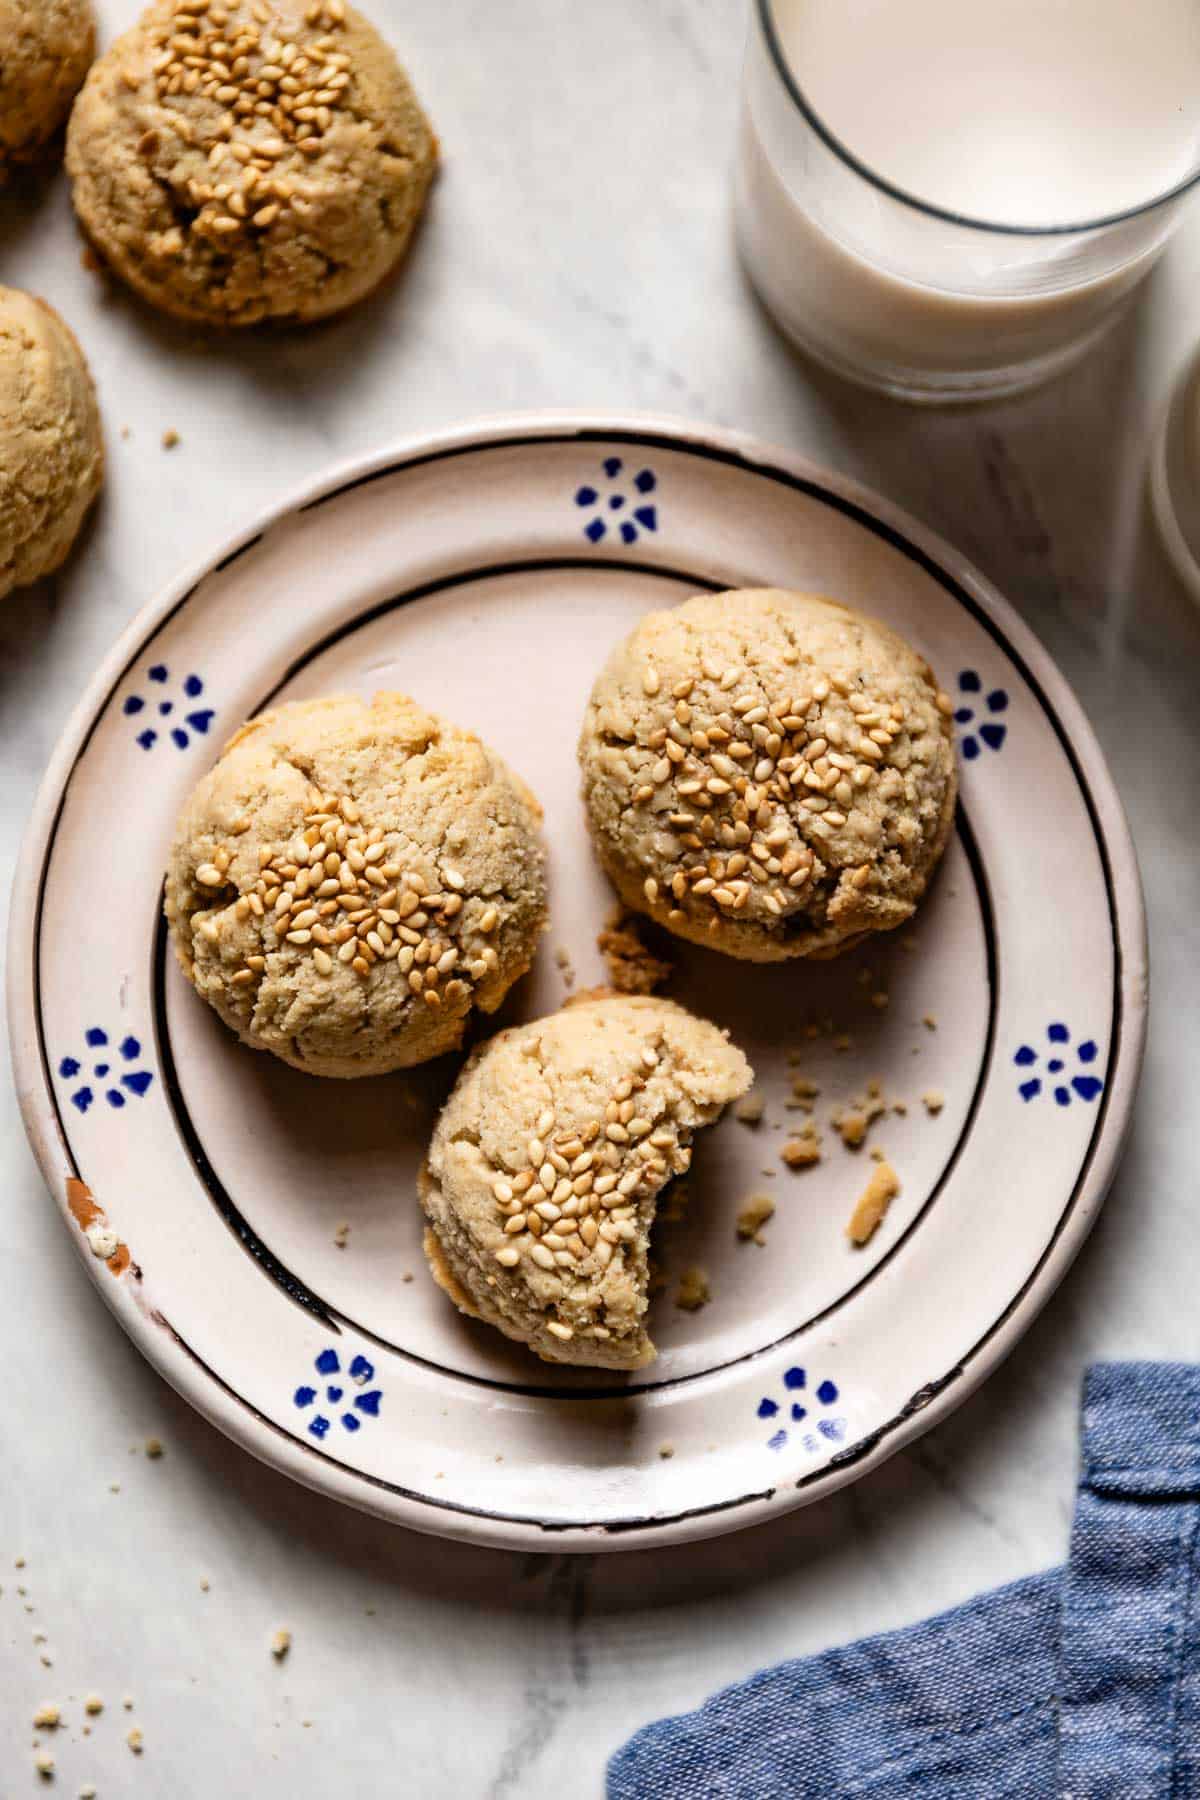 Refined sugar free tahini cookies on a small plate from the top view.